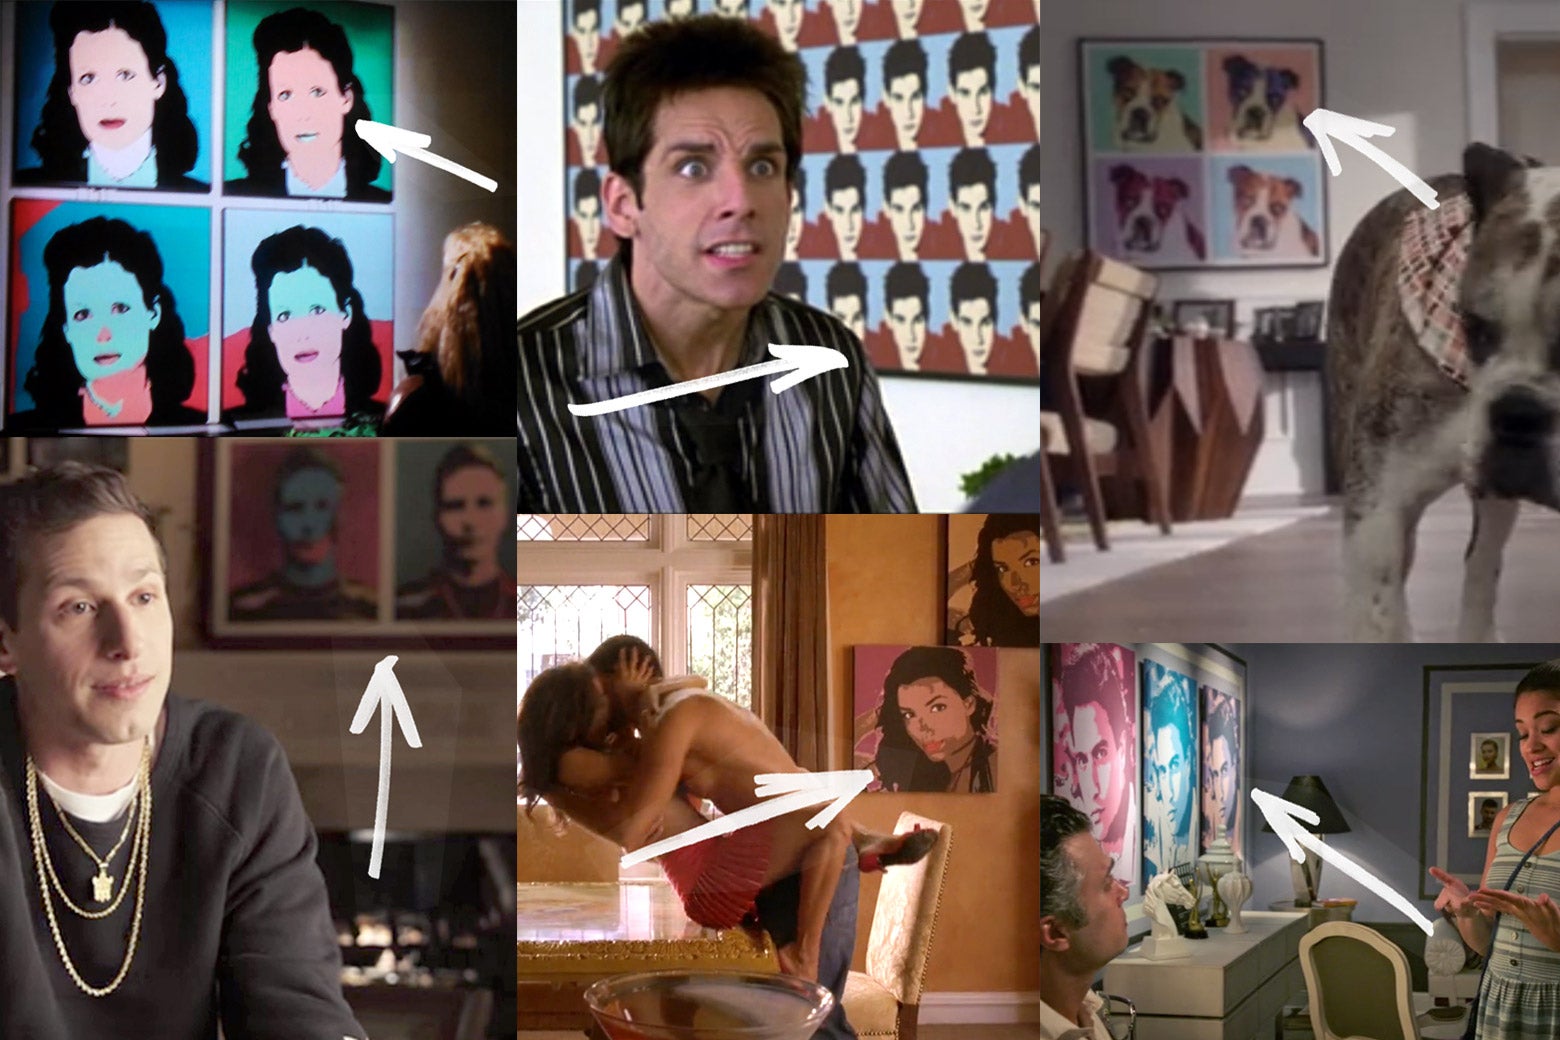 Movie scenes with Warhol-style portraits in the background.